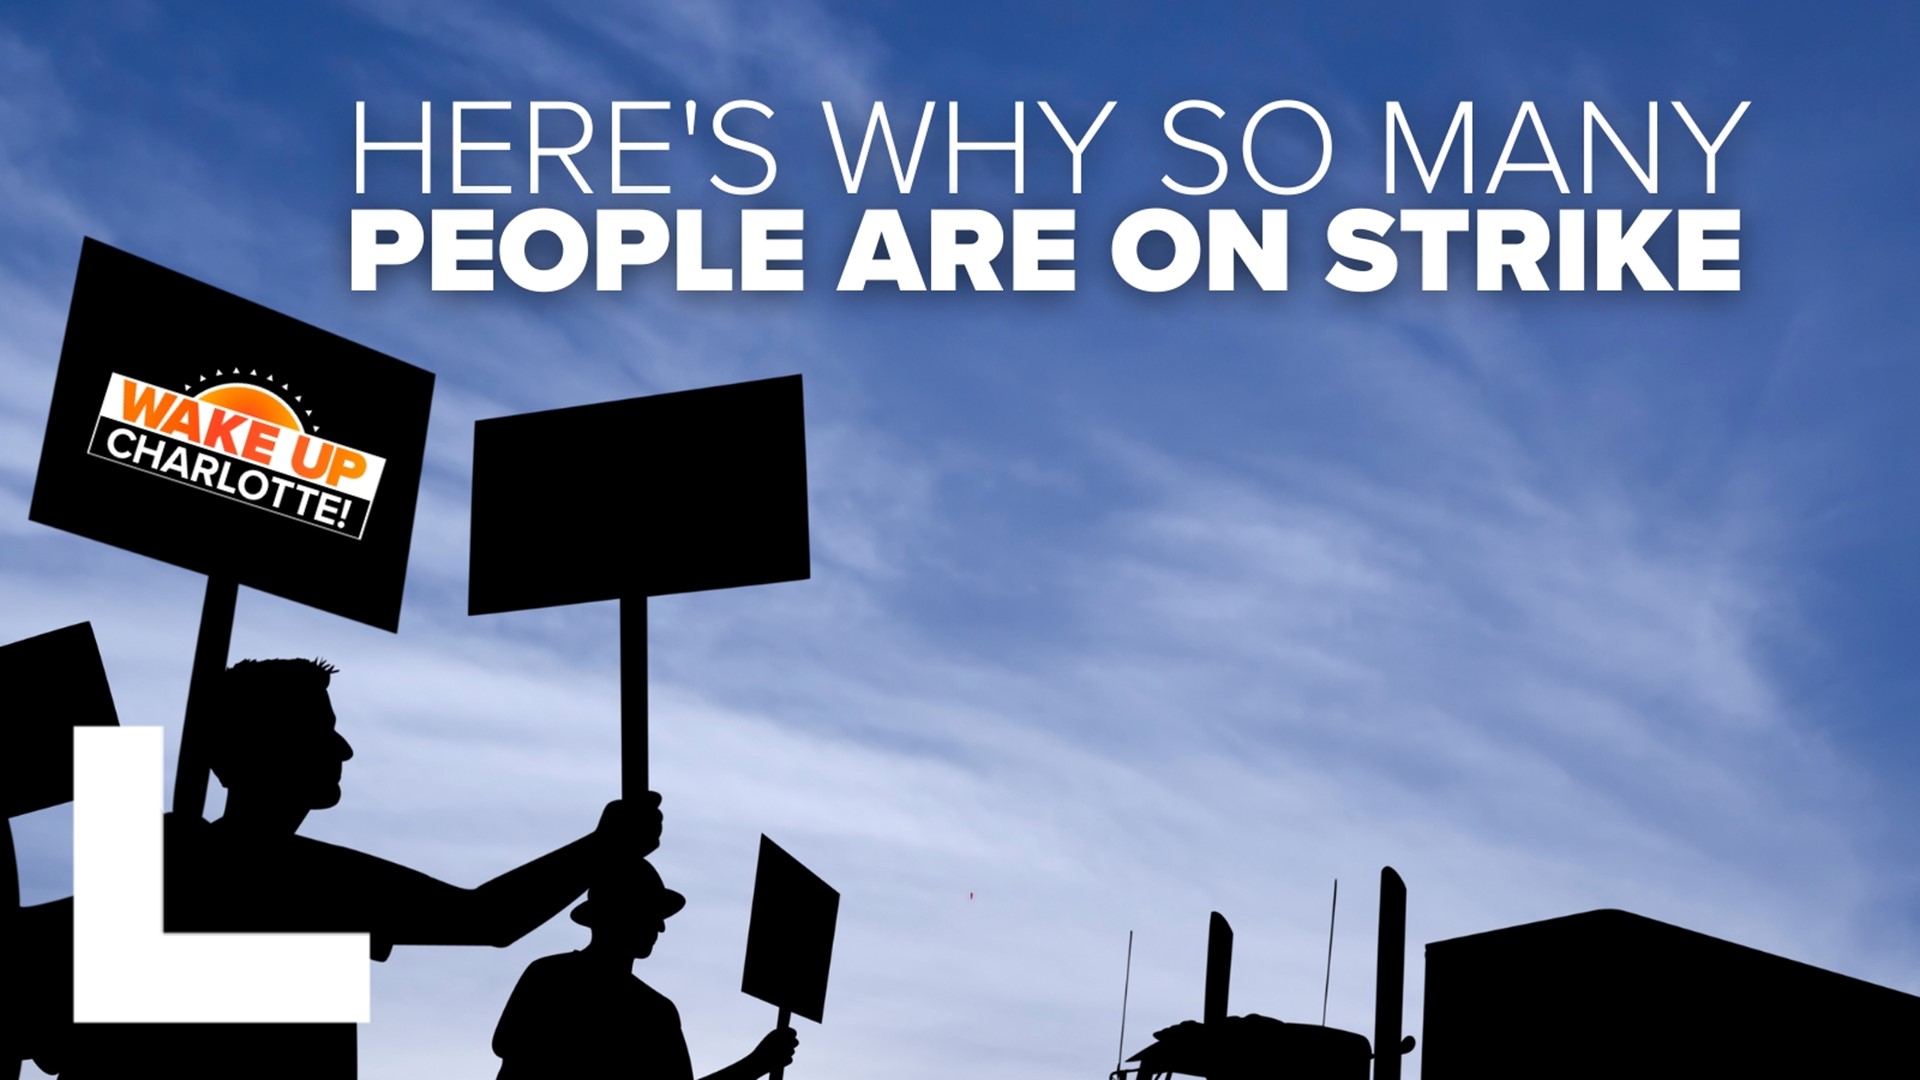 Why are there a lot of people on strike?